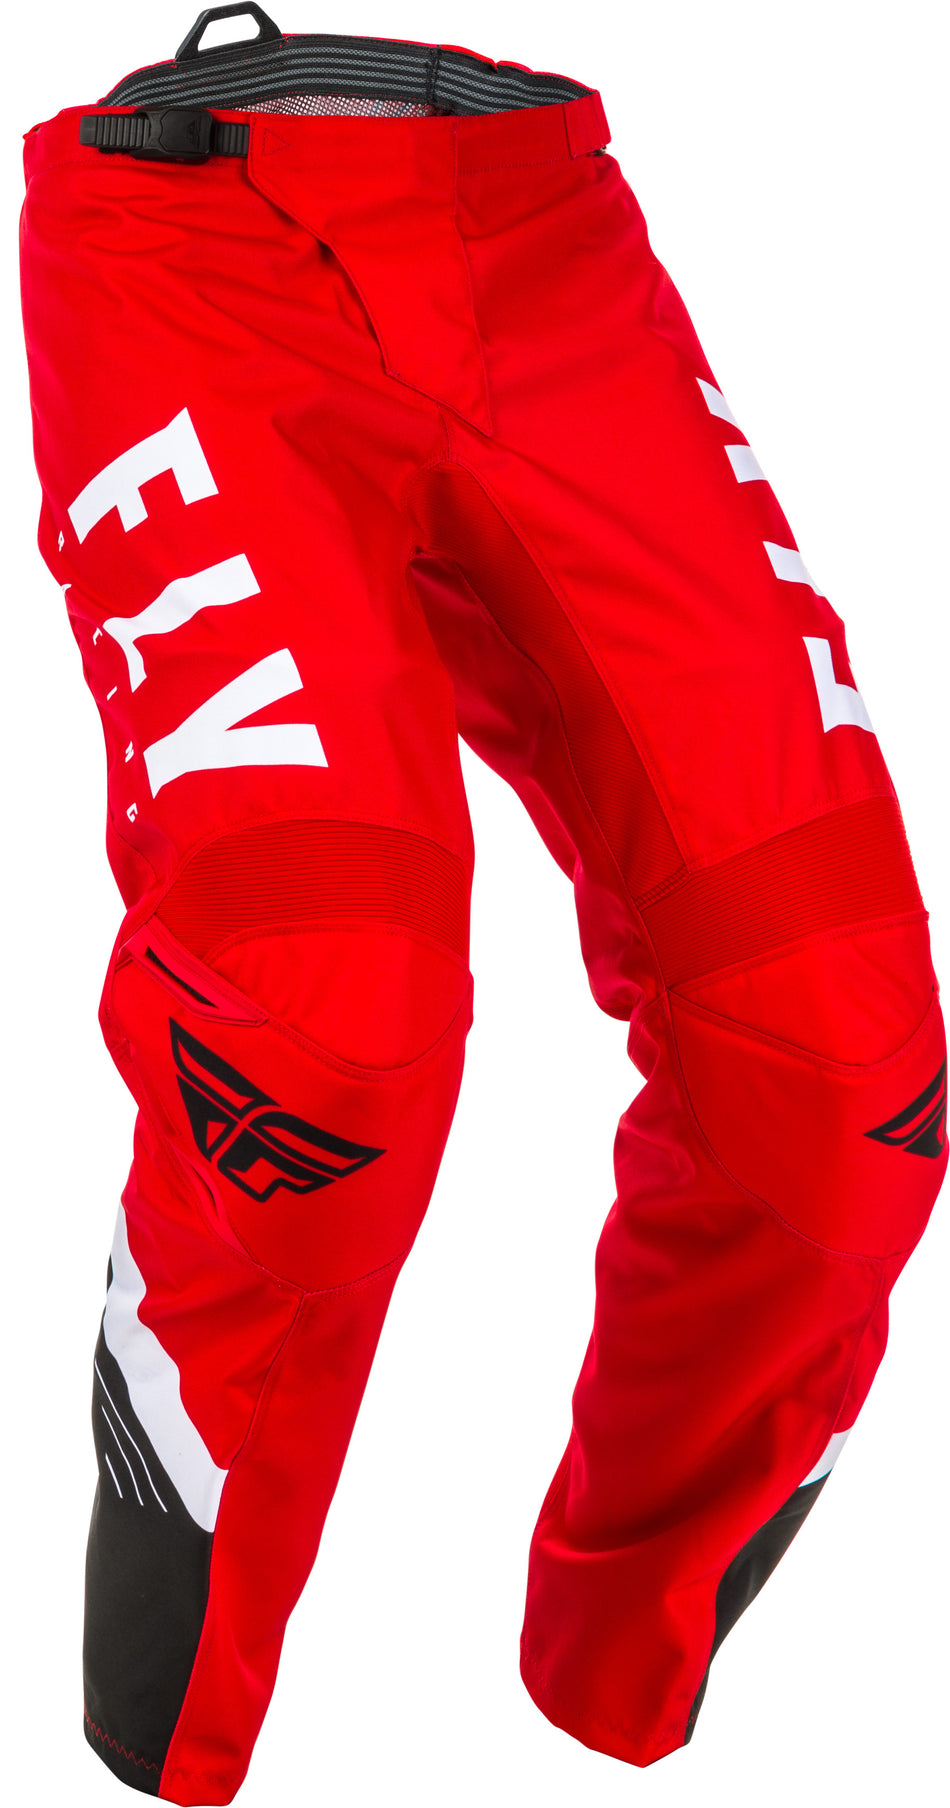 FLY RACING F-16 Pants Red/Black/White Sz 38 373-93338